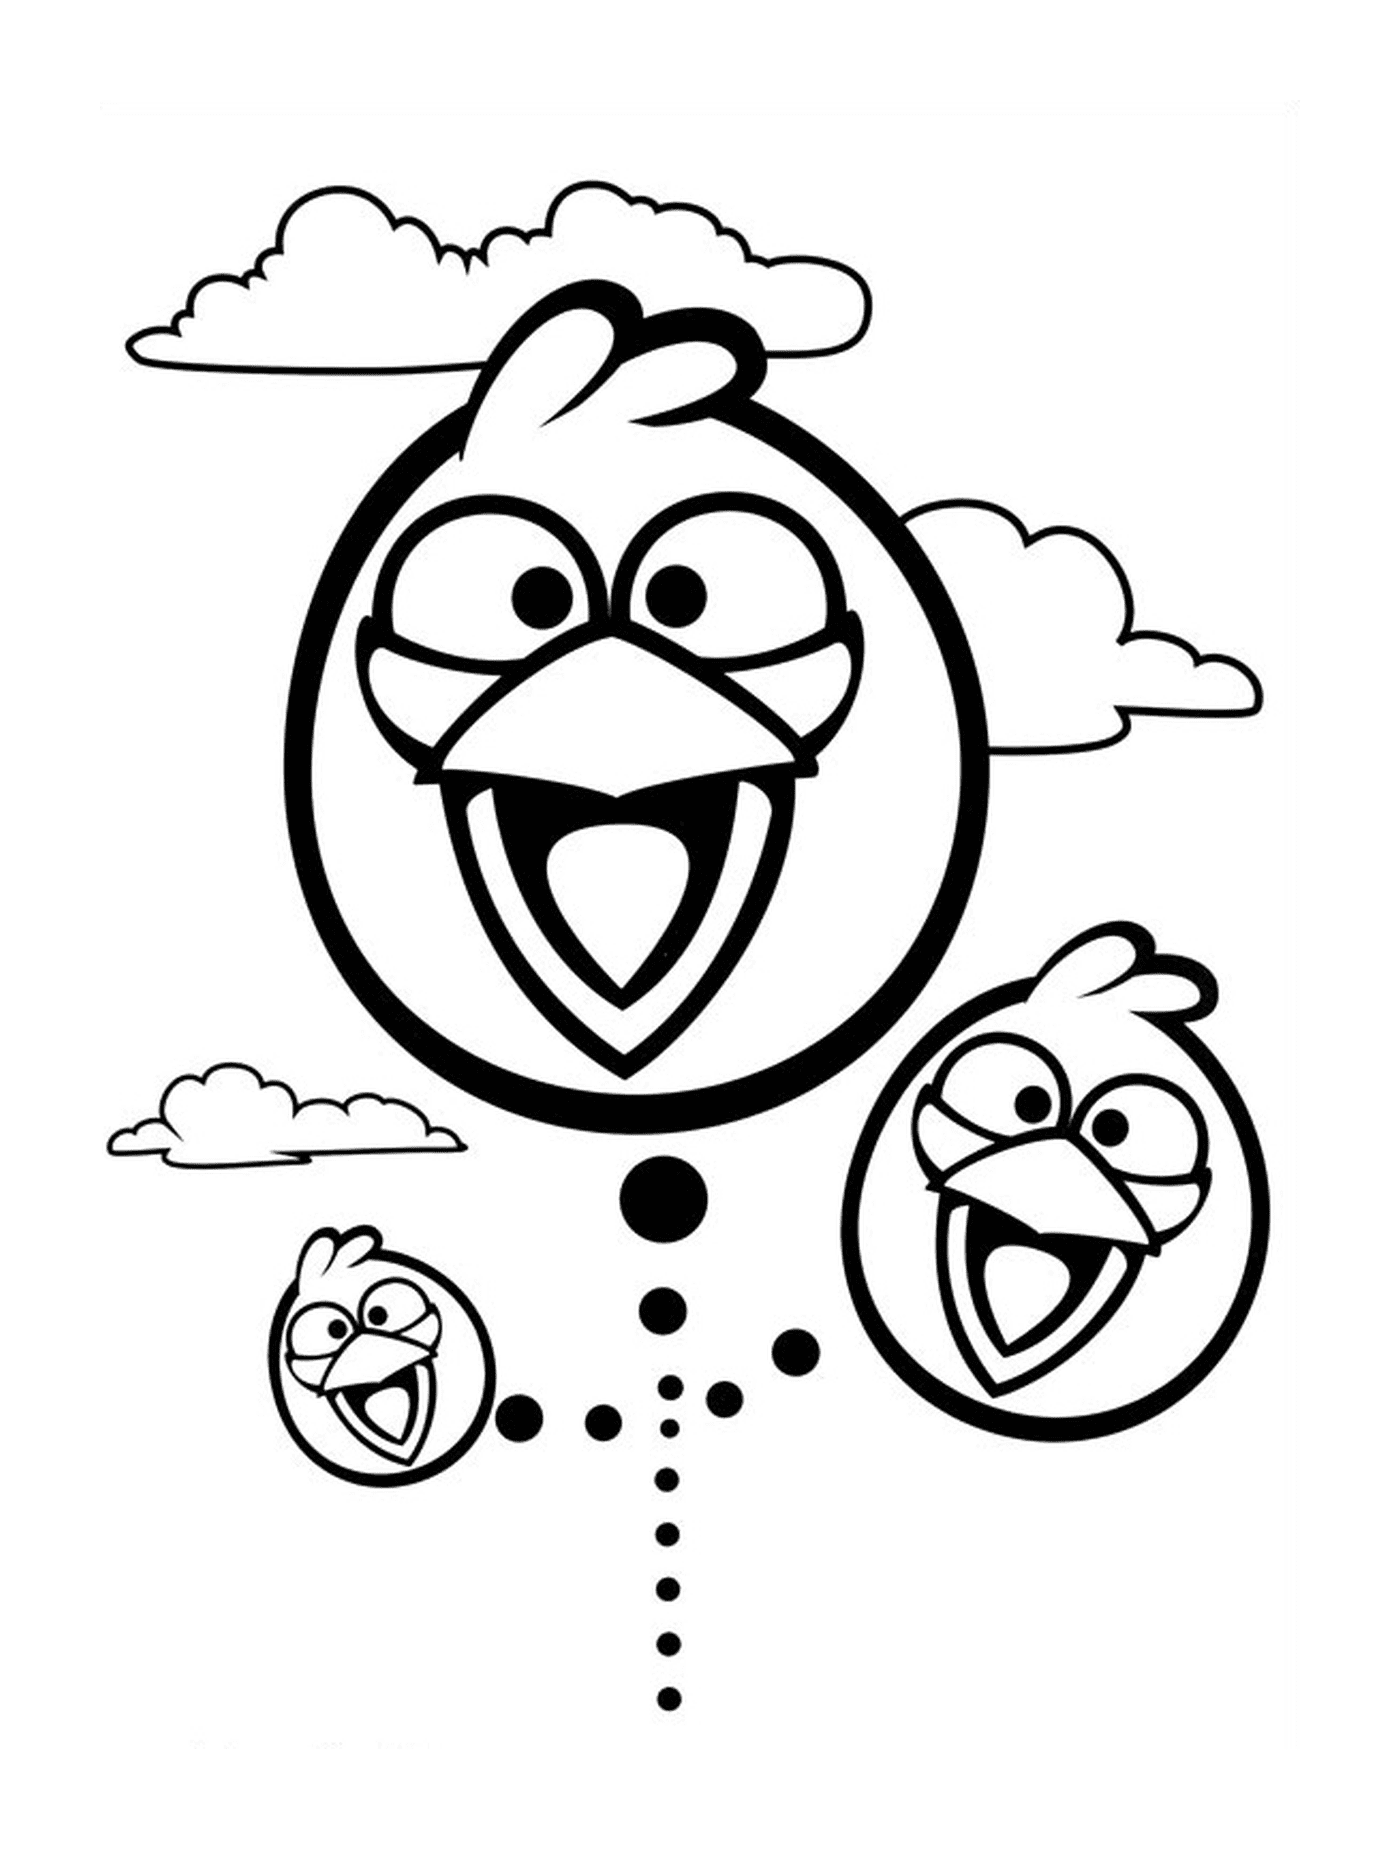  Angry Birds smiling and happy 